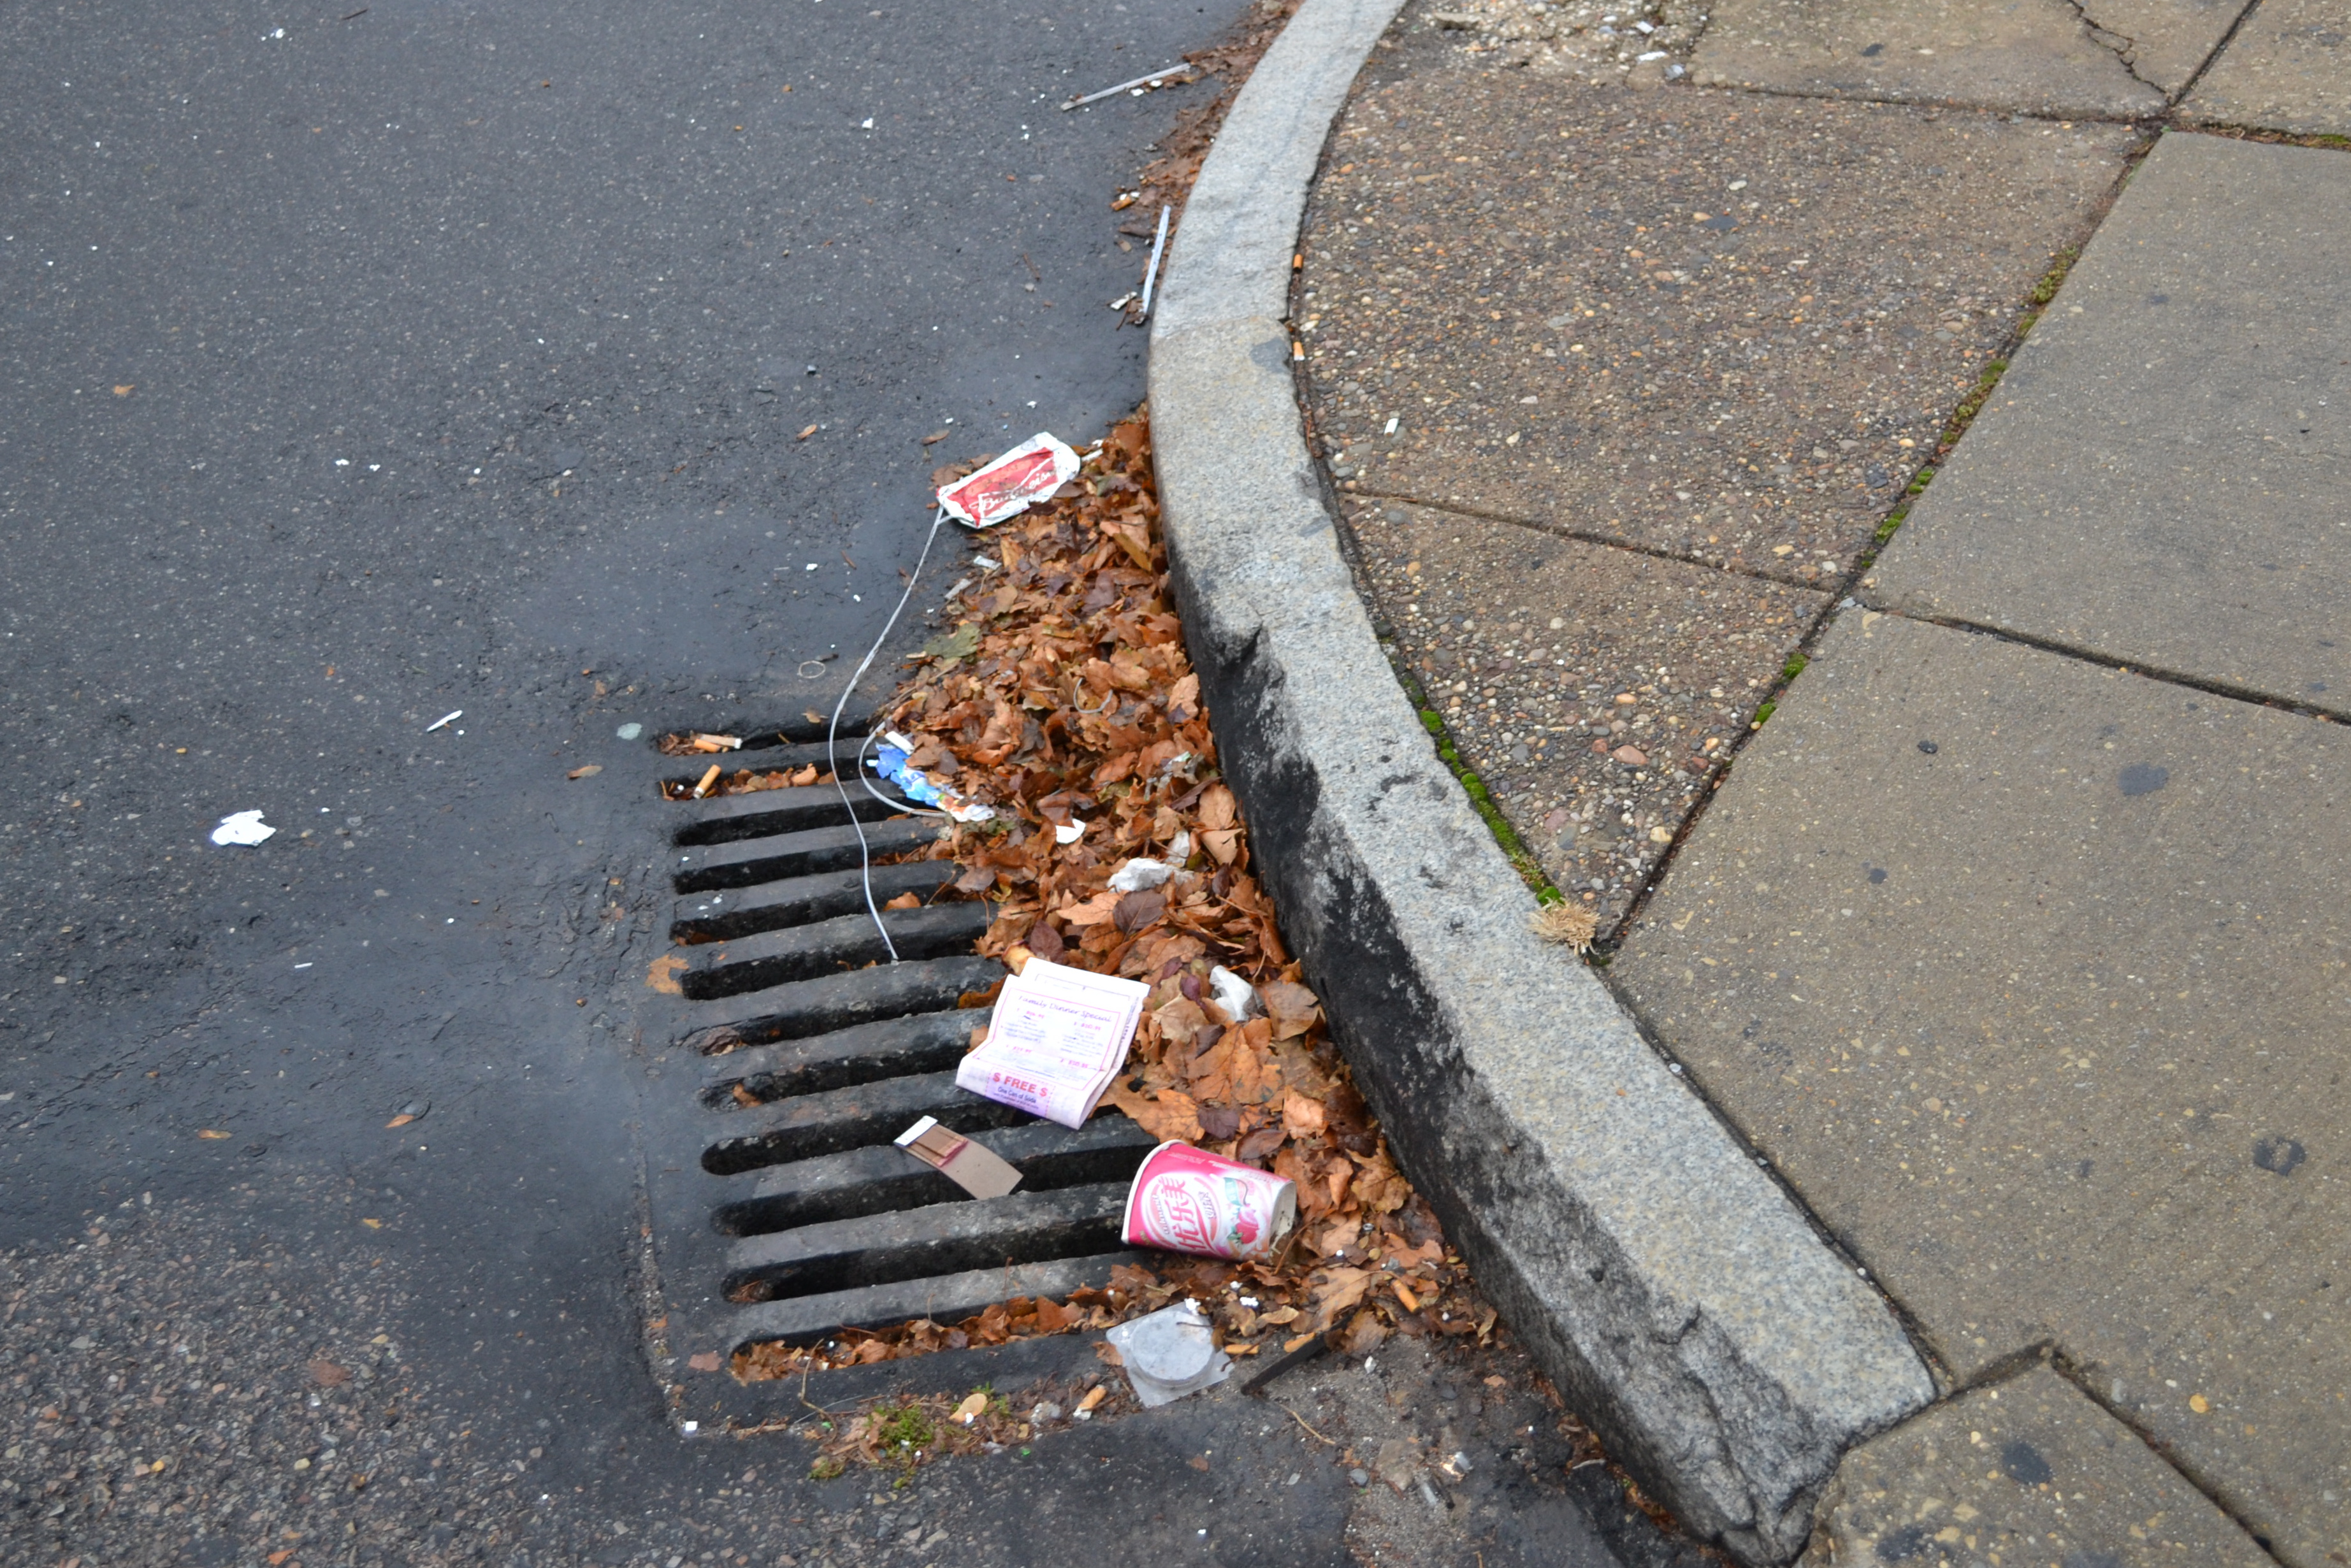 Litter covers a storm drain in PSCA's coverage area